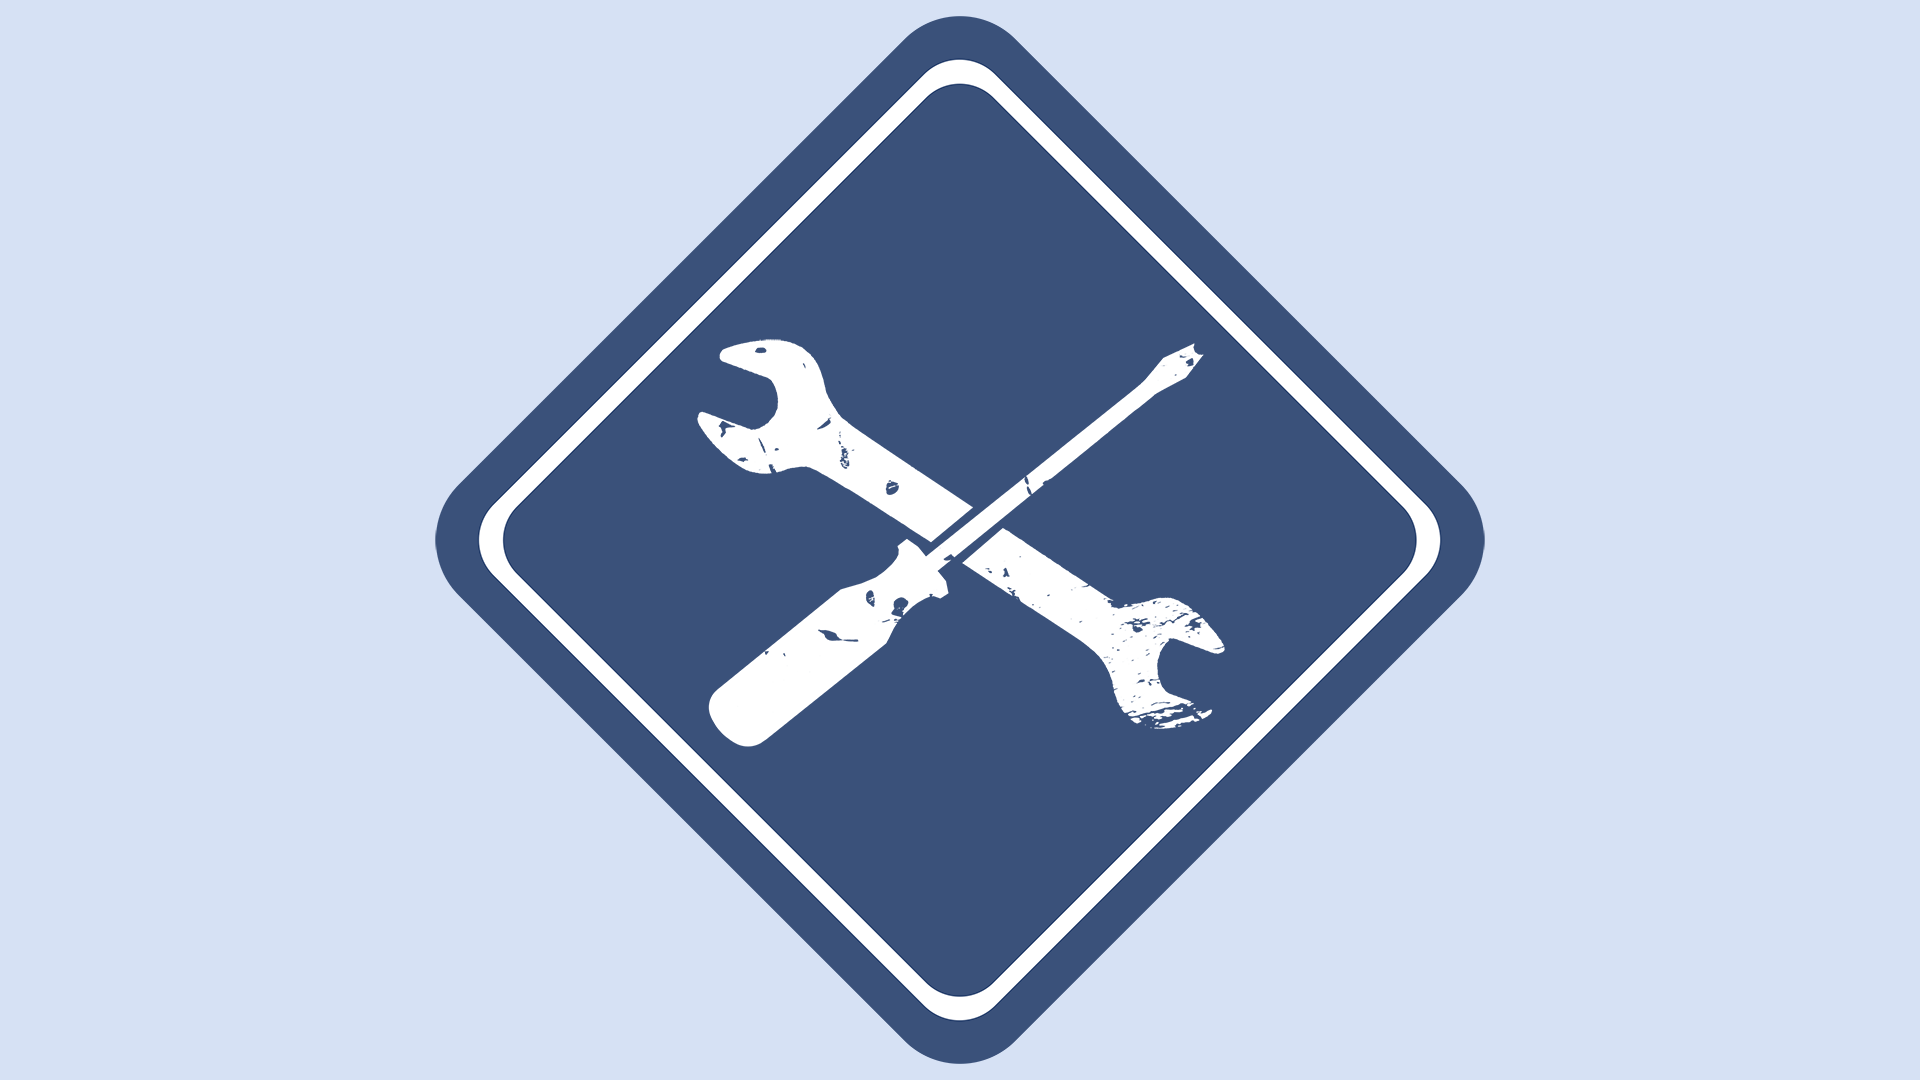 Icon for Top mechanic